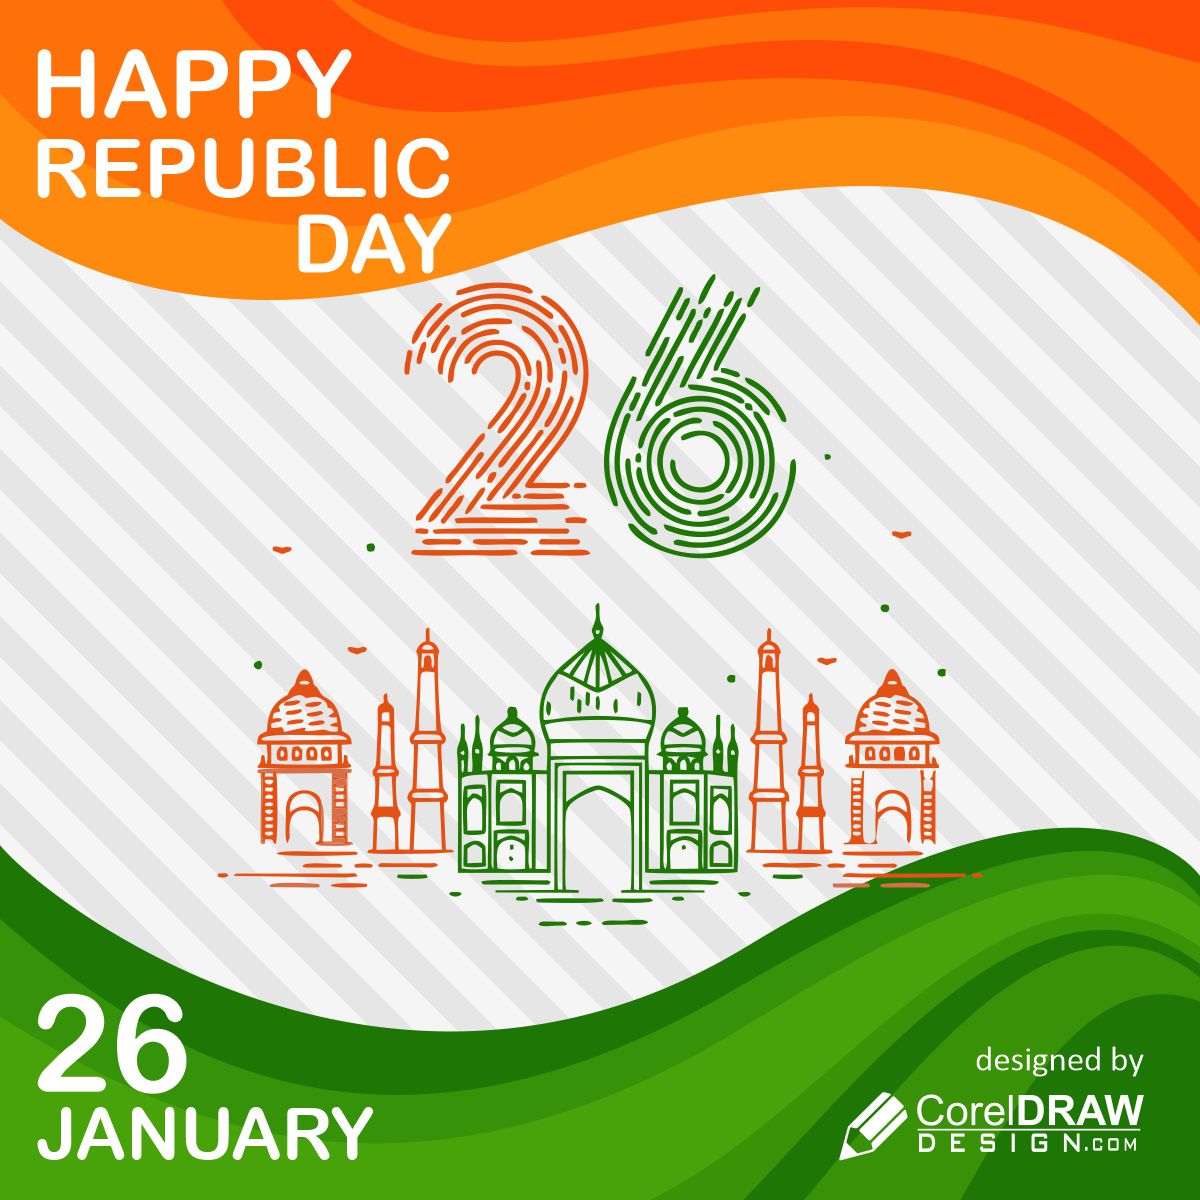 Download Happy Republic Day poster vector design for free ...